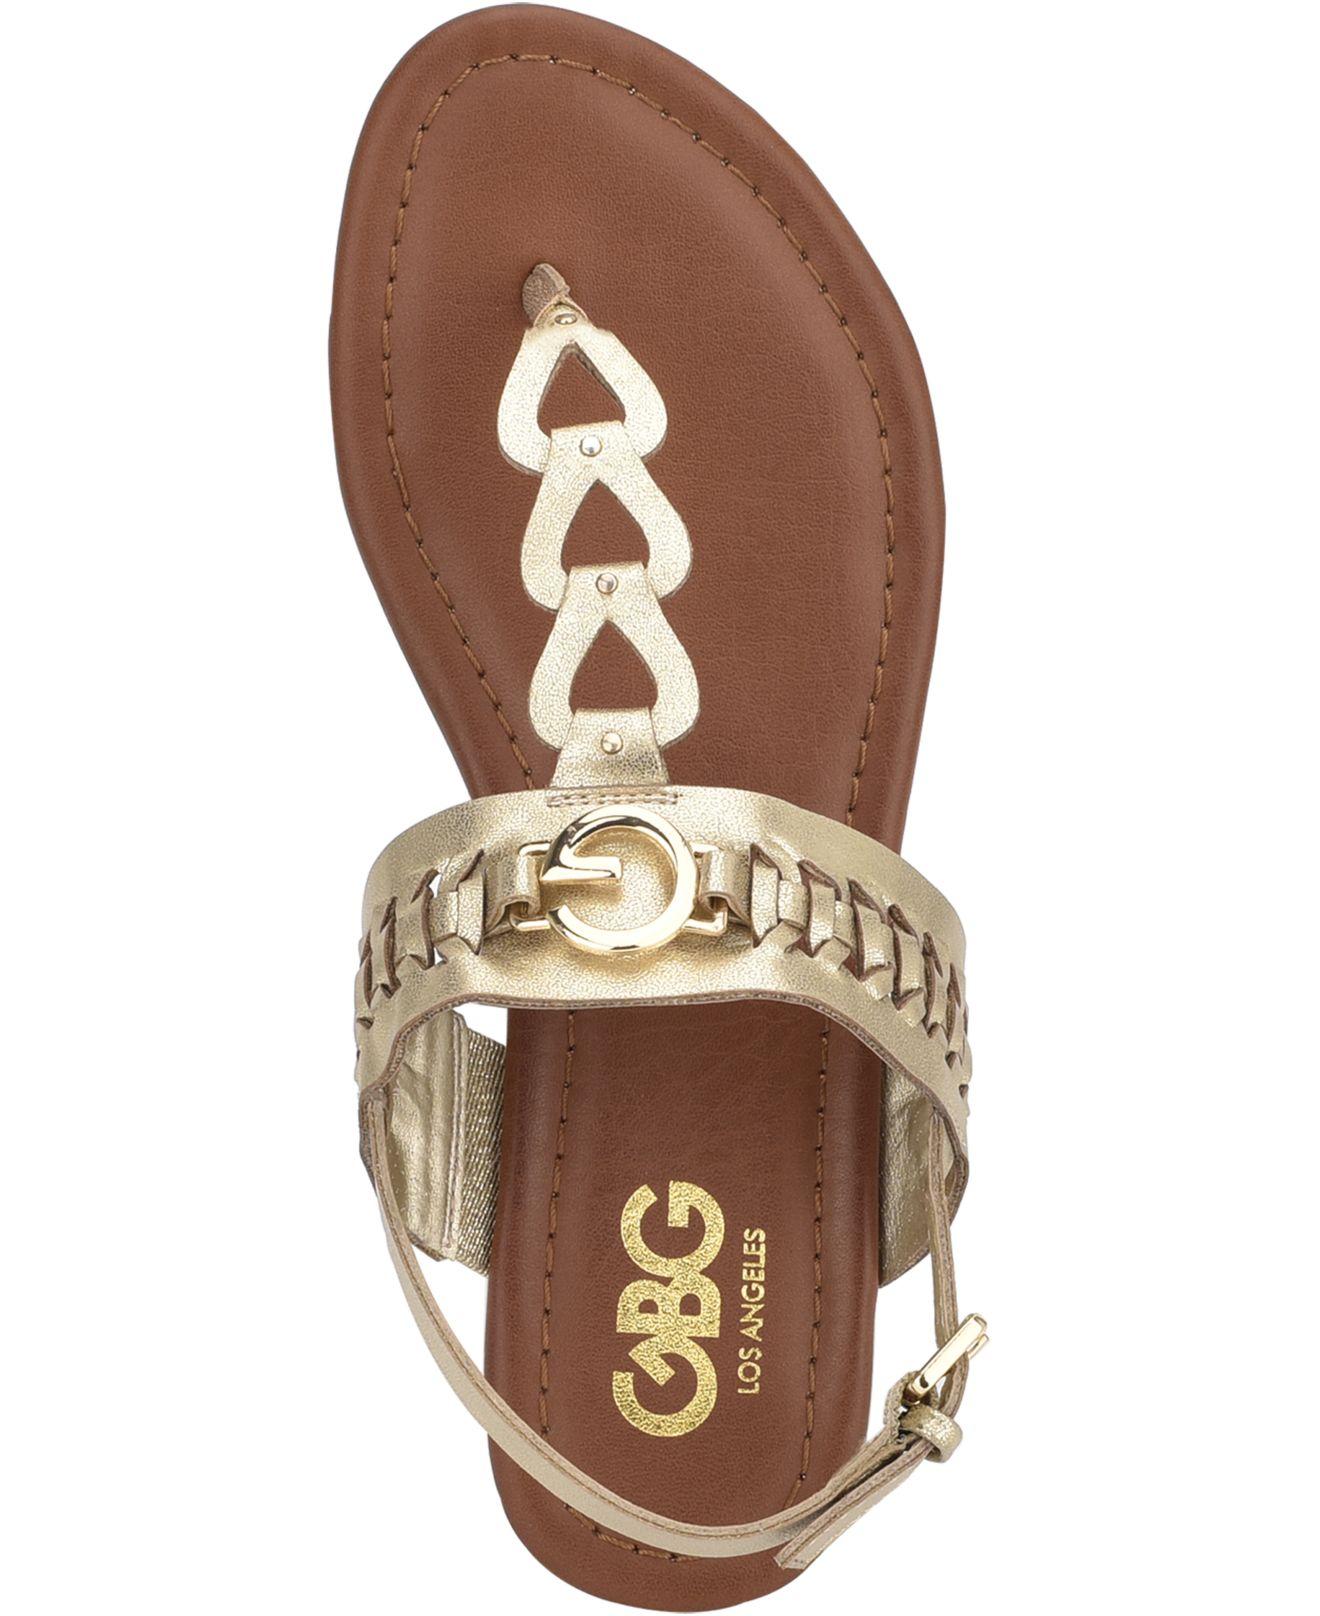 G by Guess Gbg Los Angeles Lovey Flat Sandals in Gold (Metallic) - Lyst